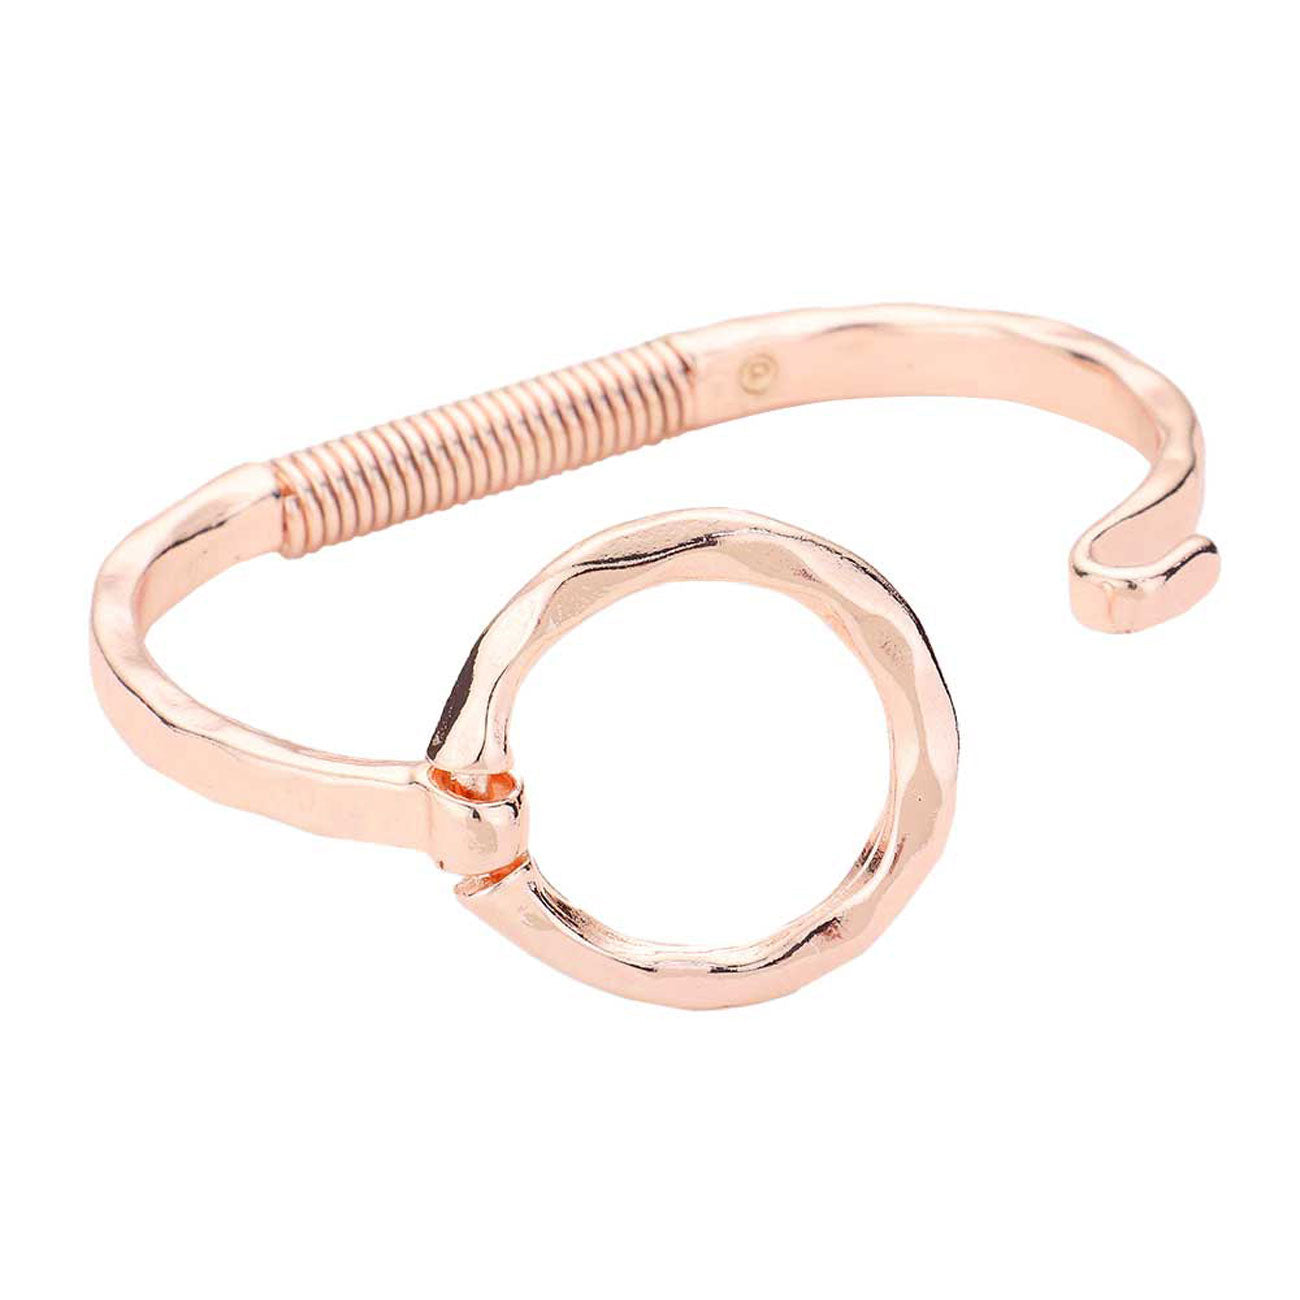 Rose Gold Hammered Open Metal Circle Hook Bracelet. These metal circle hook bracelets are easy to put on, take off and so comfortable for daily wear. Pair these with tee and jeans and you are good to go. . Perfect Birthday gift, friendship day, Mother's Day, Graduation Gift or any other Special occasion. 